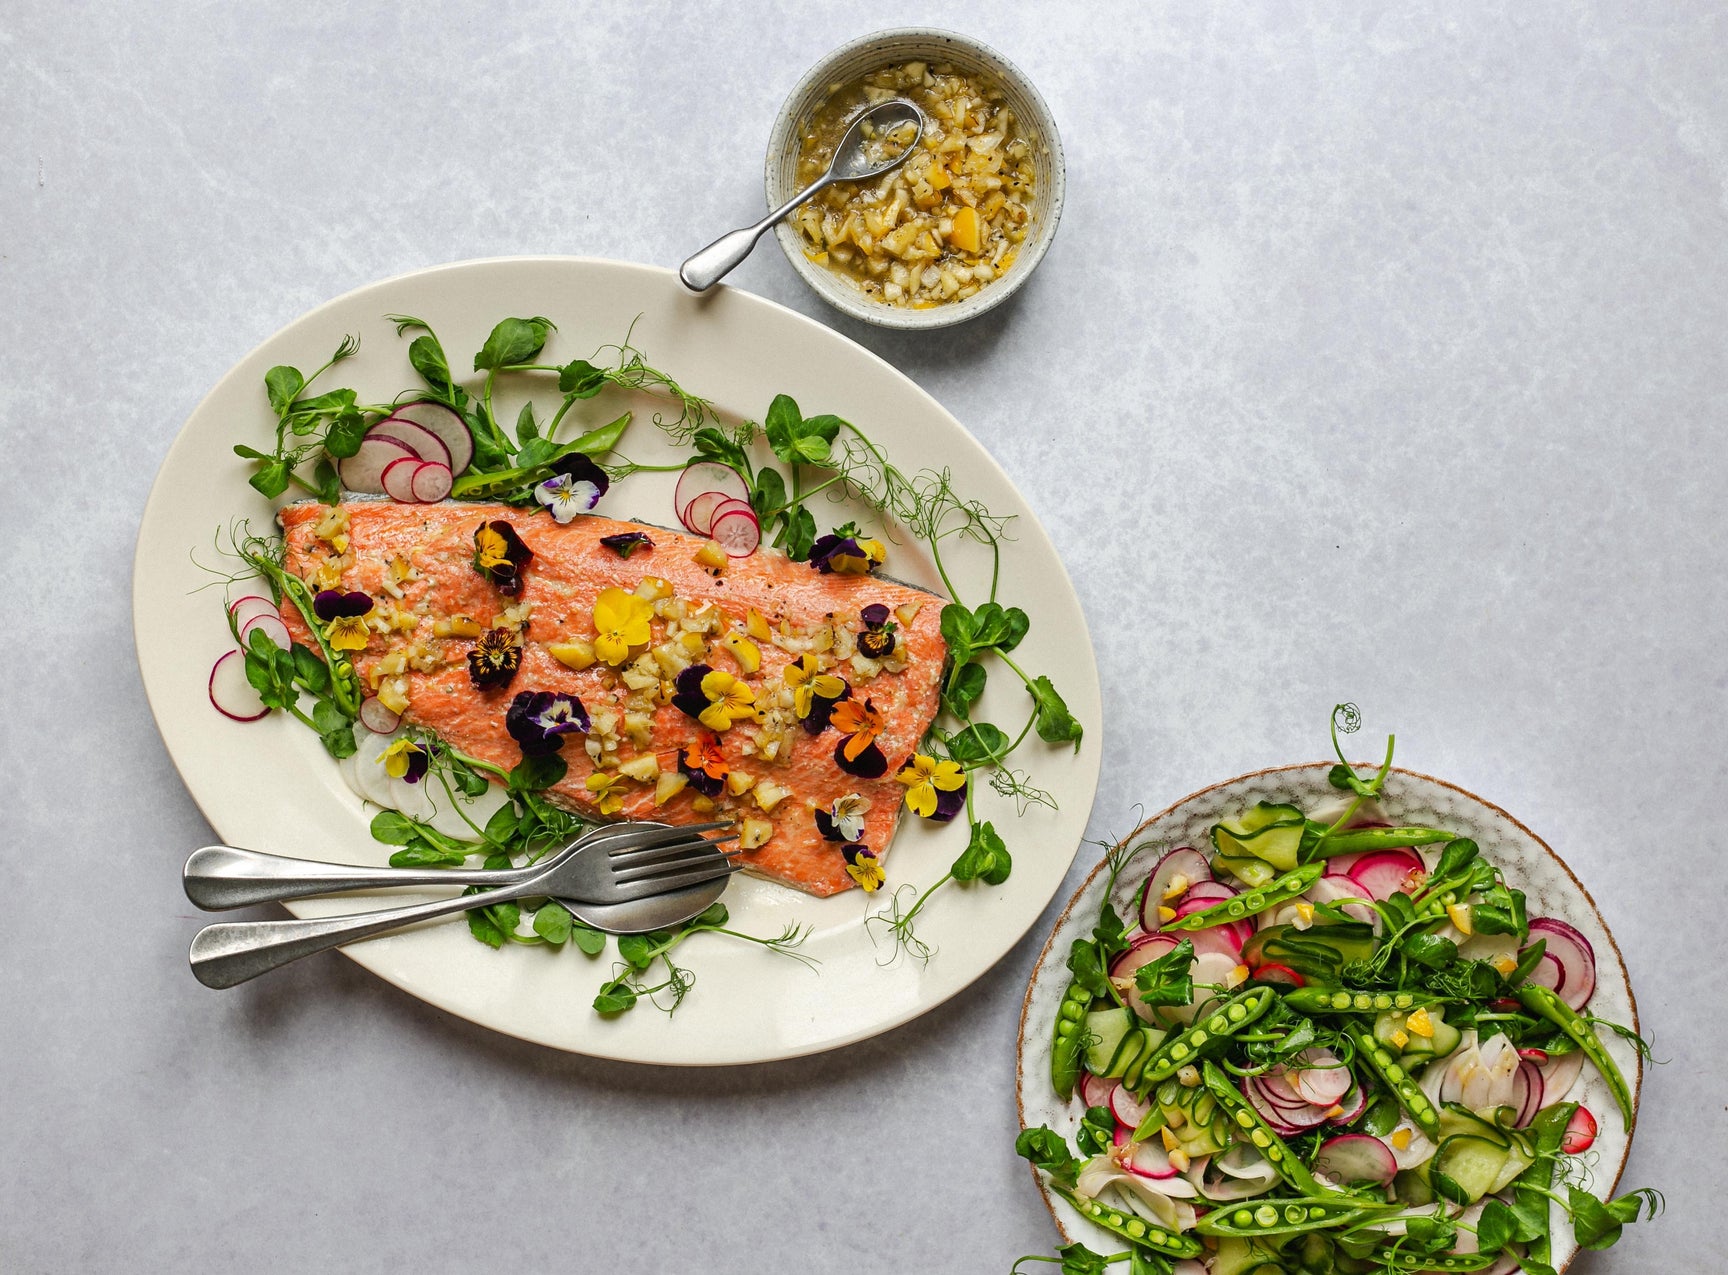 Slow-cooked sockeye salmon, charred citrus dressing and spring salad